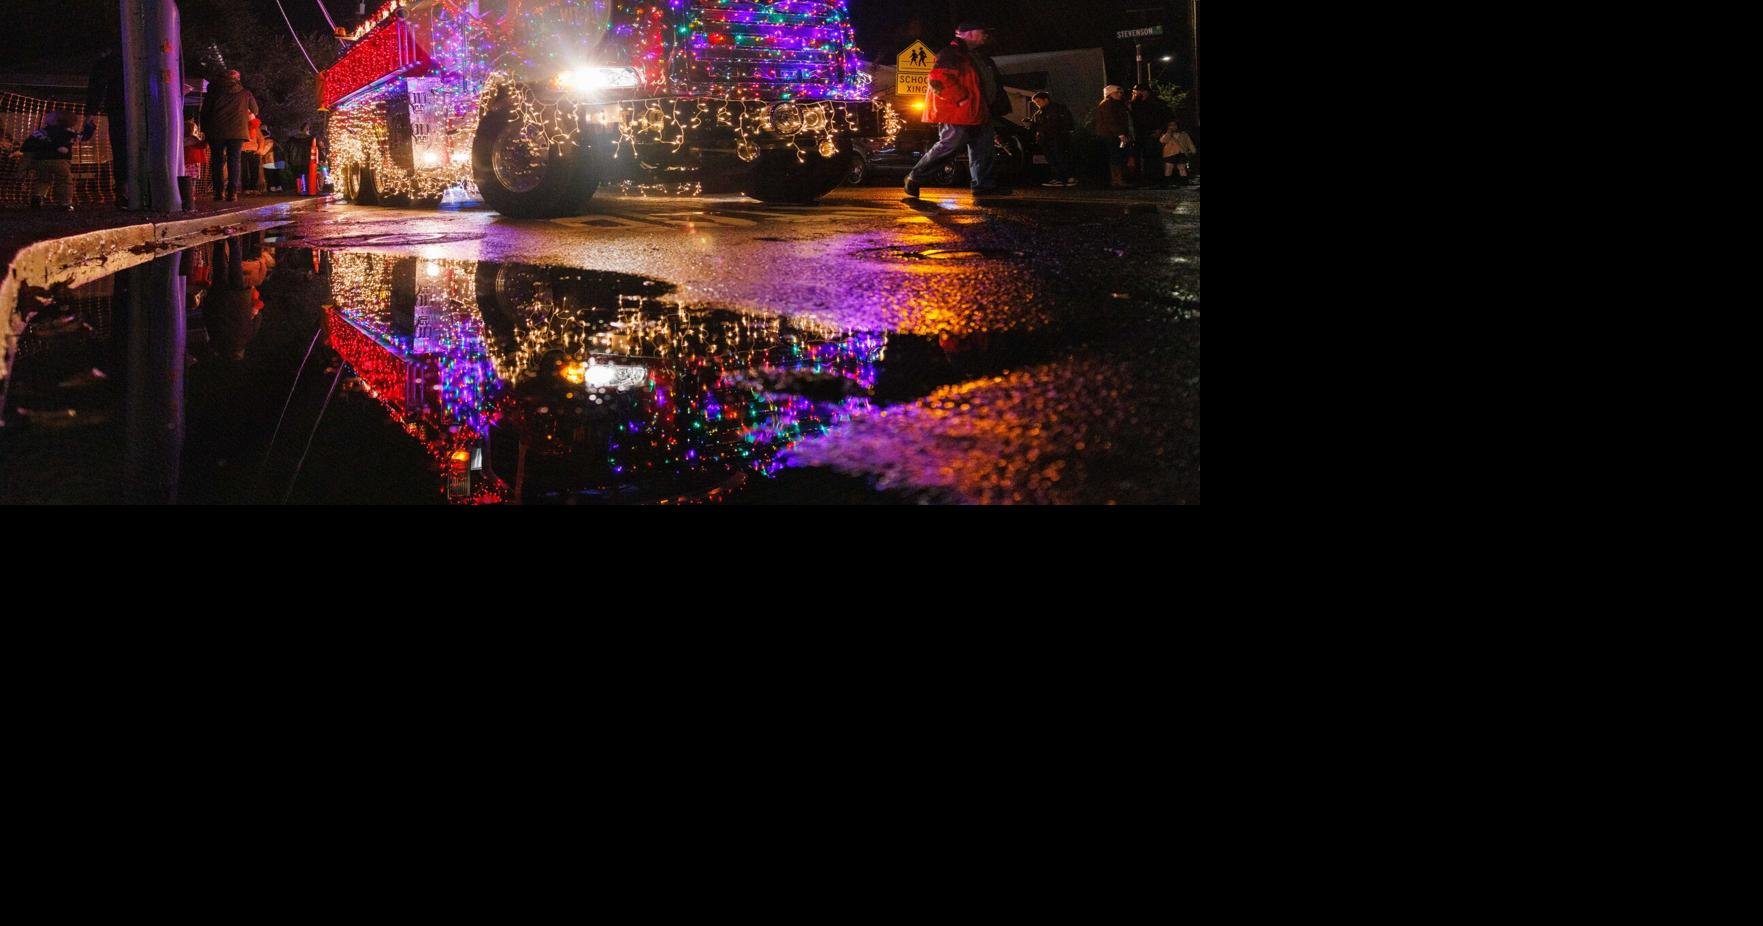 Calistoga Lighted Tractor Parade